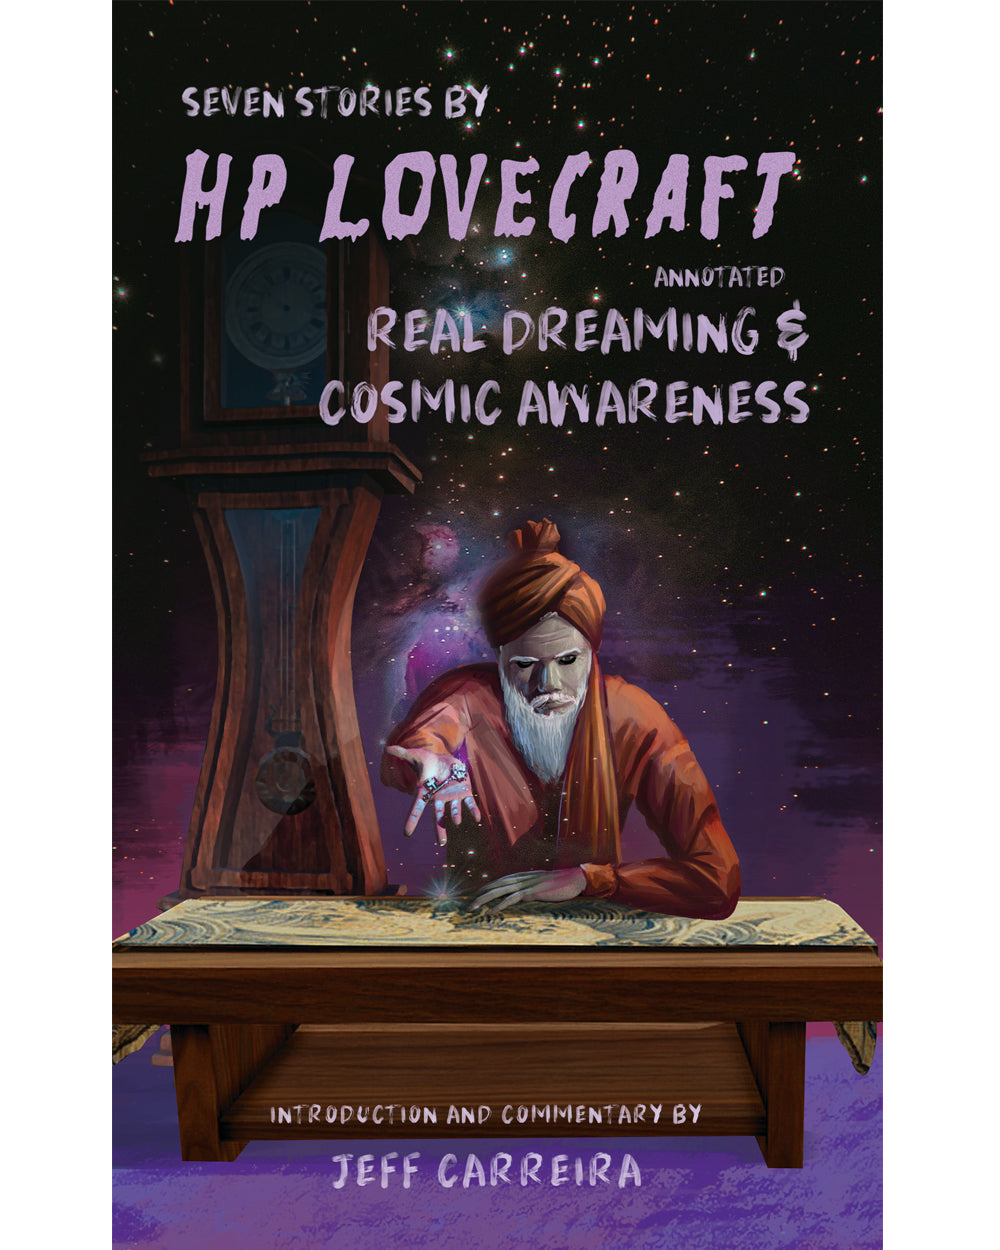 Seven Stories by H. P. Lovecraft (Annotated): Real Dreaming and Cosmic Awareness